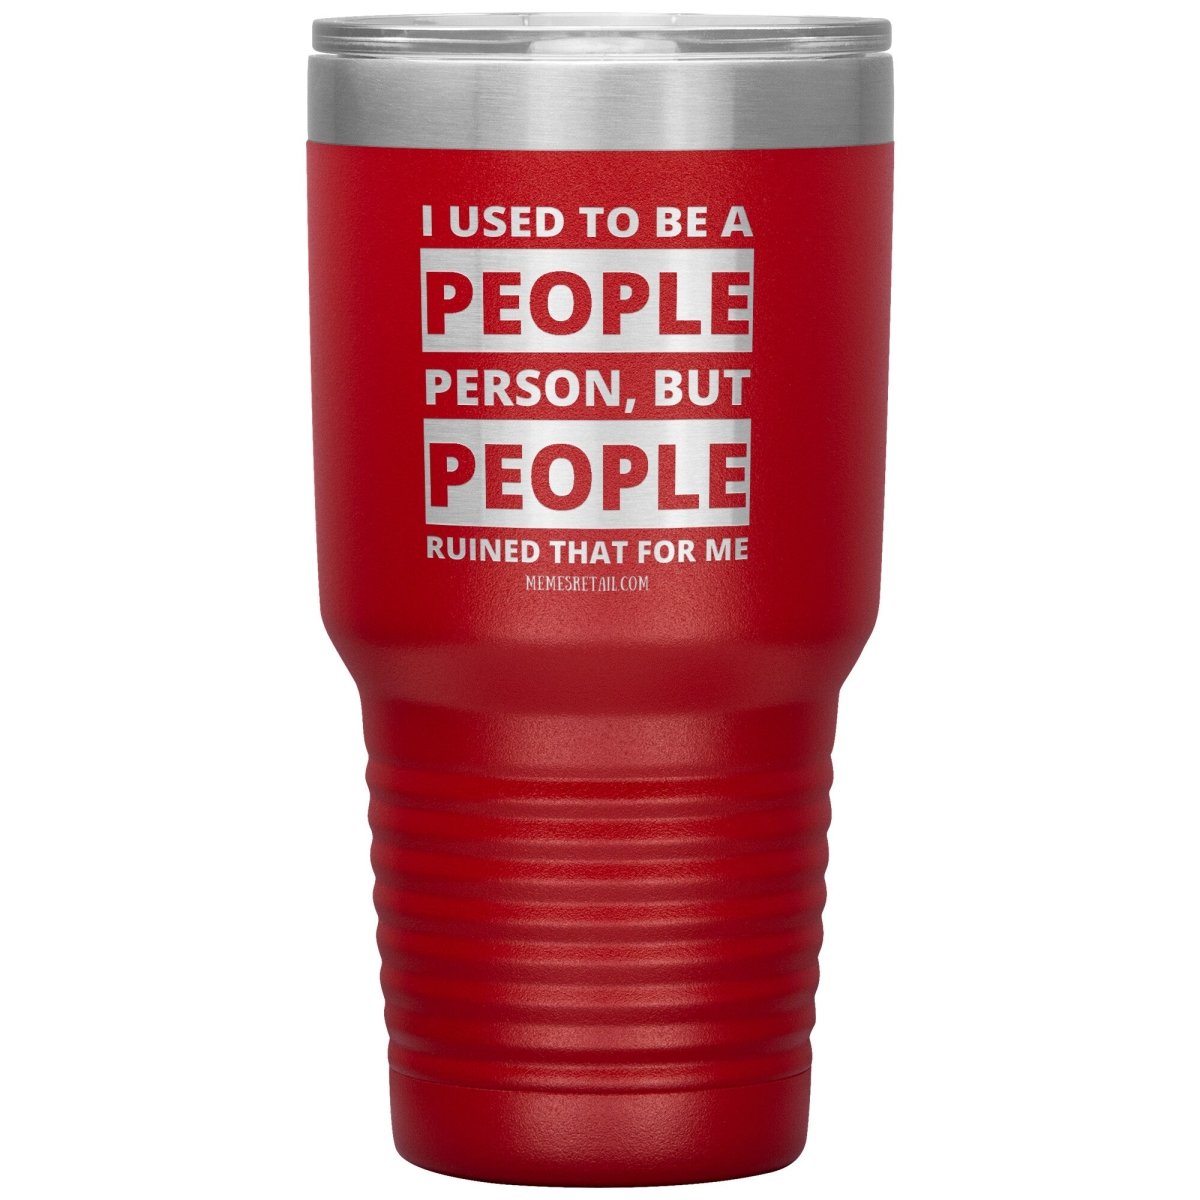 I Used To Be A People Person, But People Ruined That For Me Tumblers, 30oz Insulated Tumbler / Red - MemesRetail.com